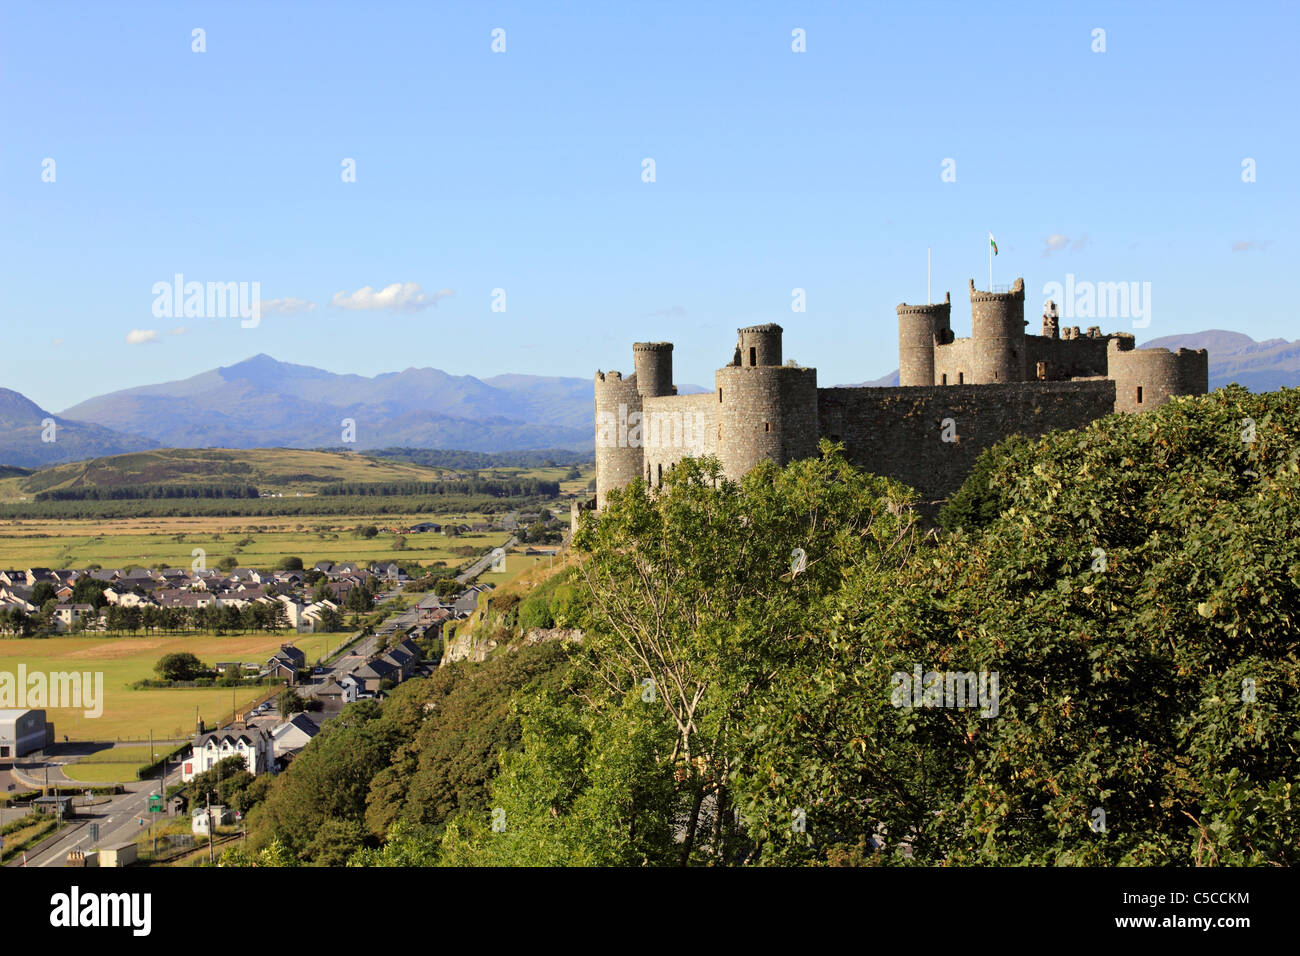 Harlech castle with the triangular peak of Mount Snowdon in the distance, Gwynedd, Wales UK Stock Photo